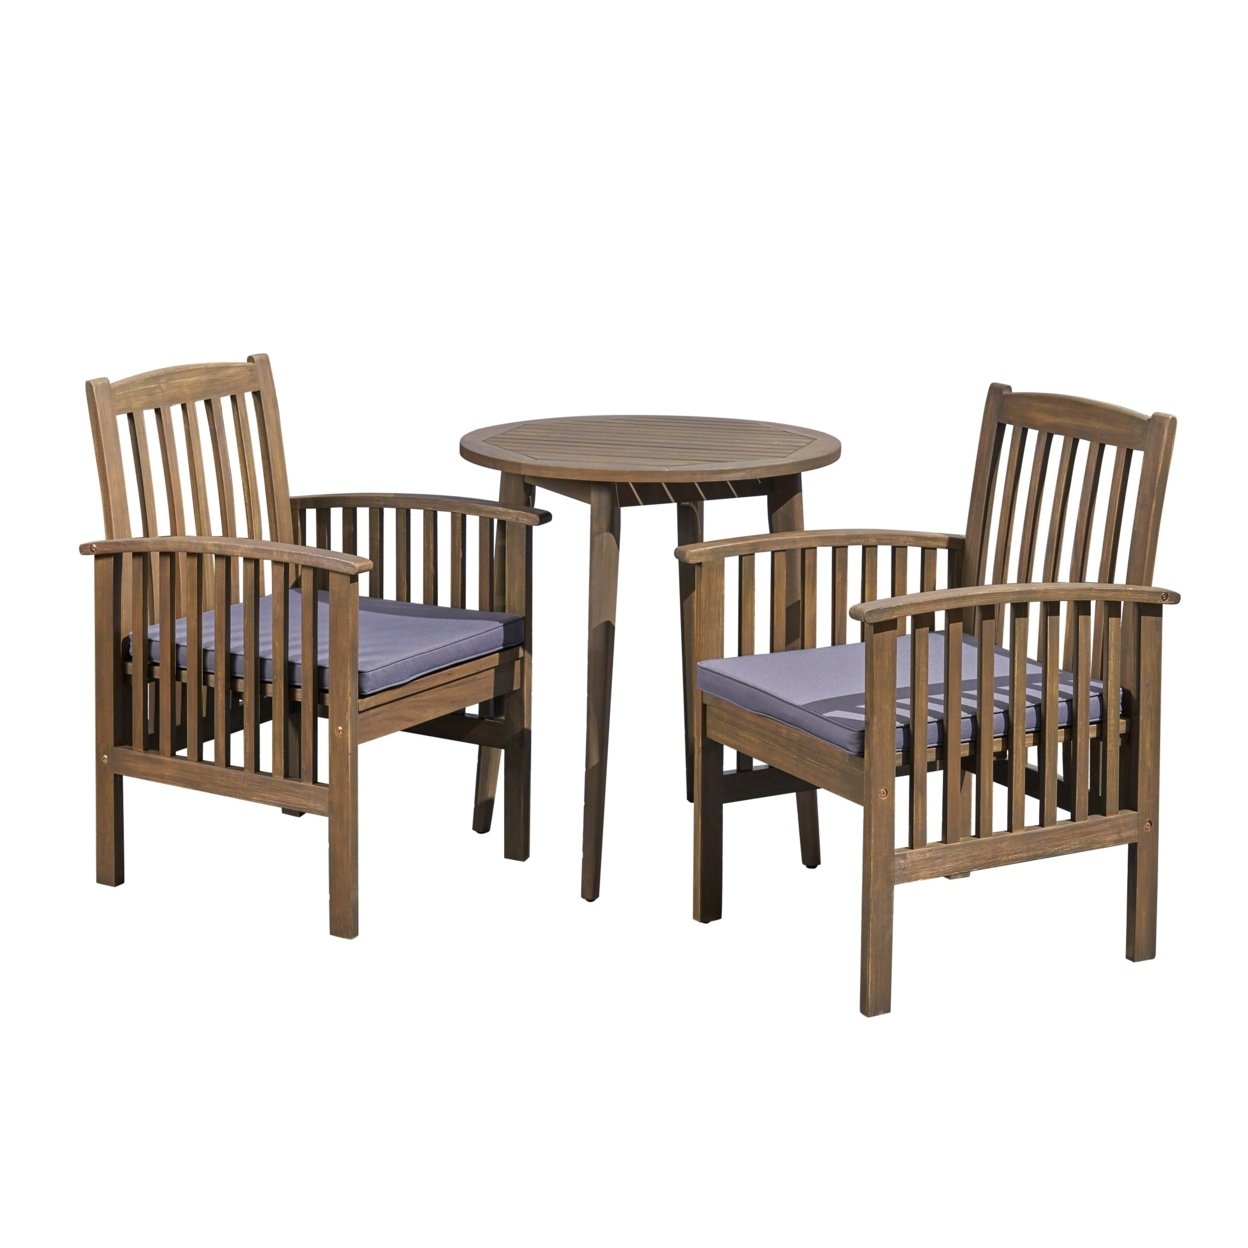 Phoenix Outdoor Acacia 2-Seater Bistro Set With Cushions And 28 Round Table With Straight Legs - Gray Finish + Dark Gray